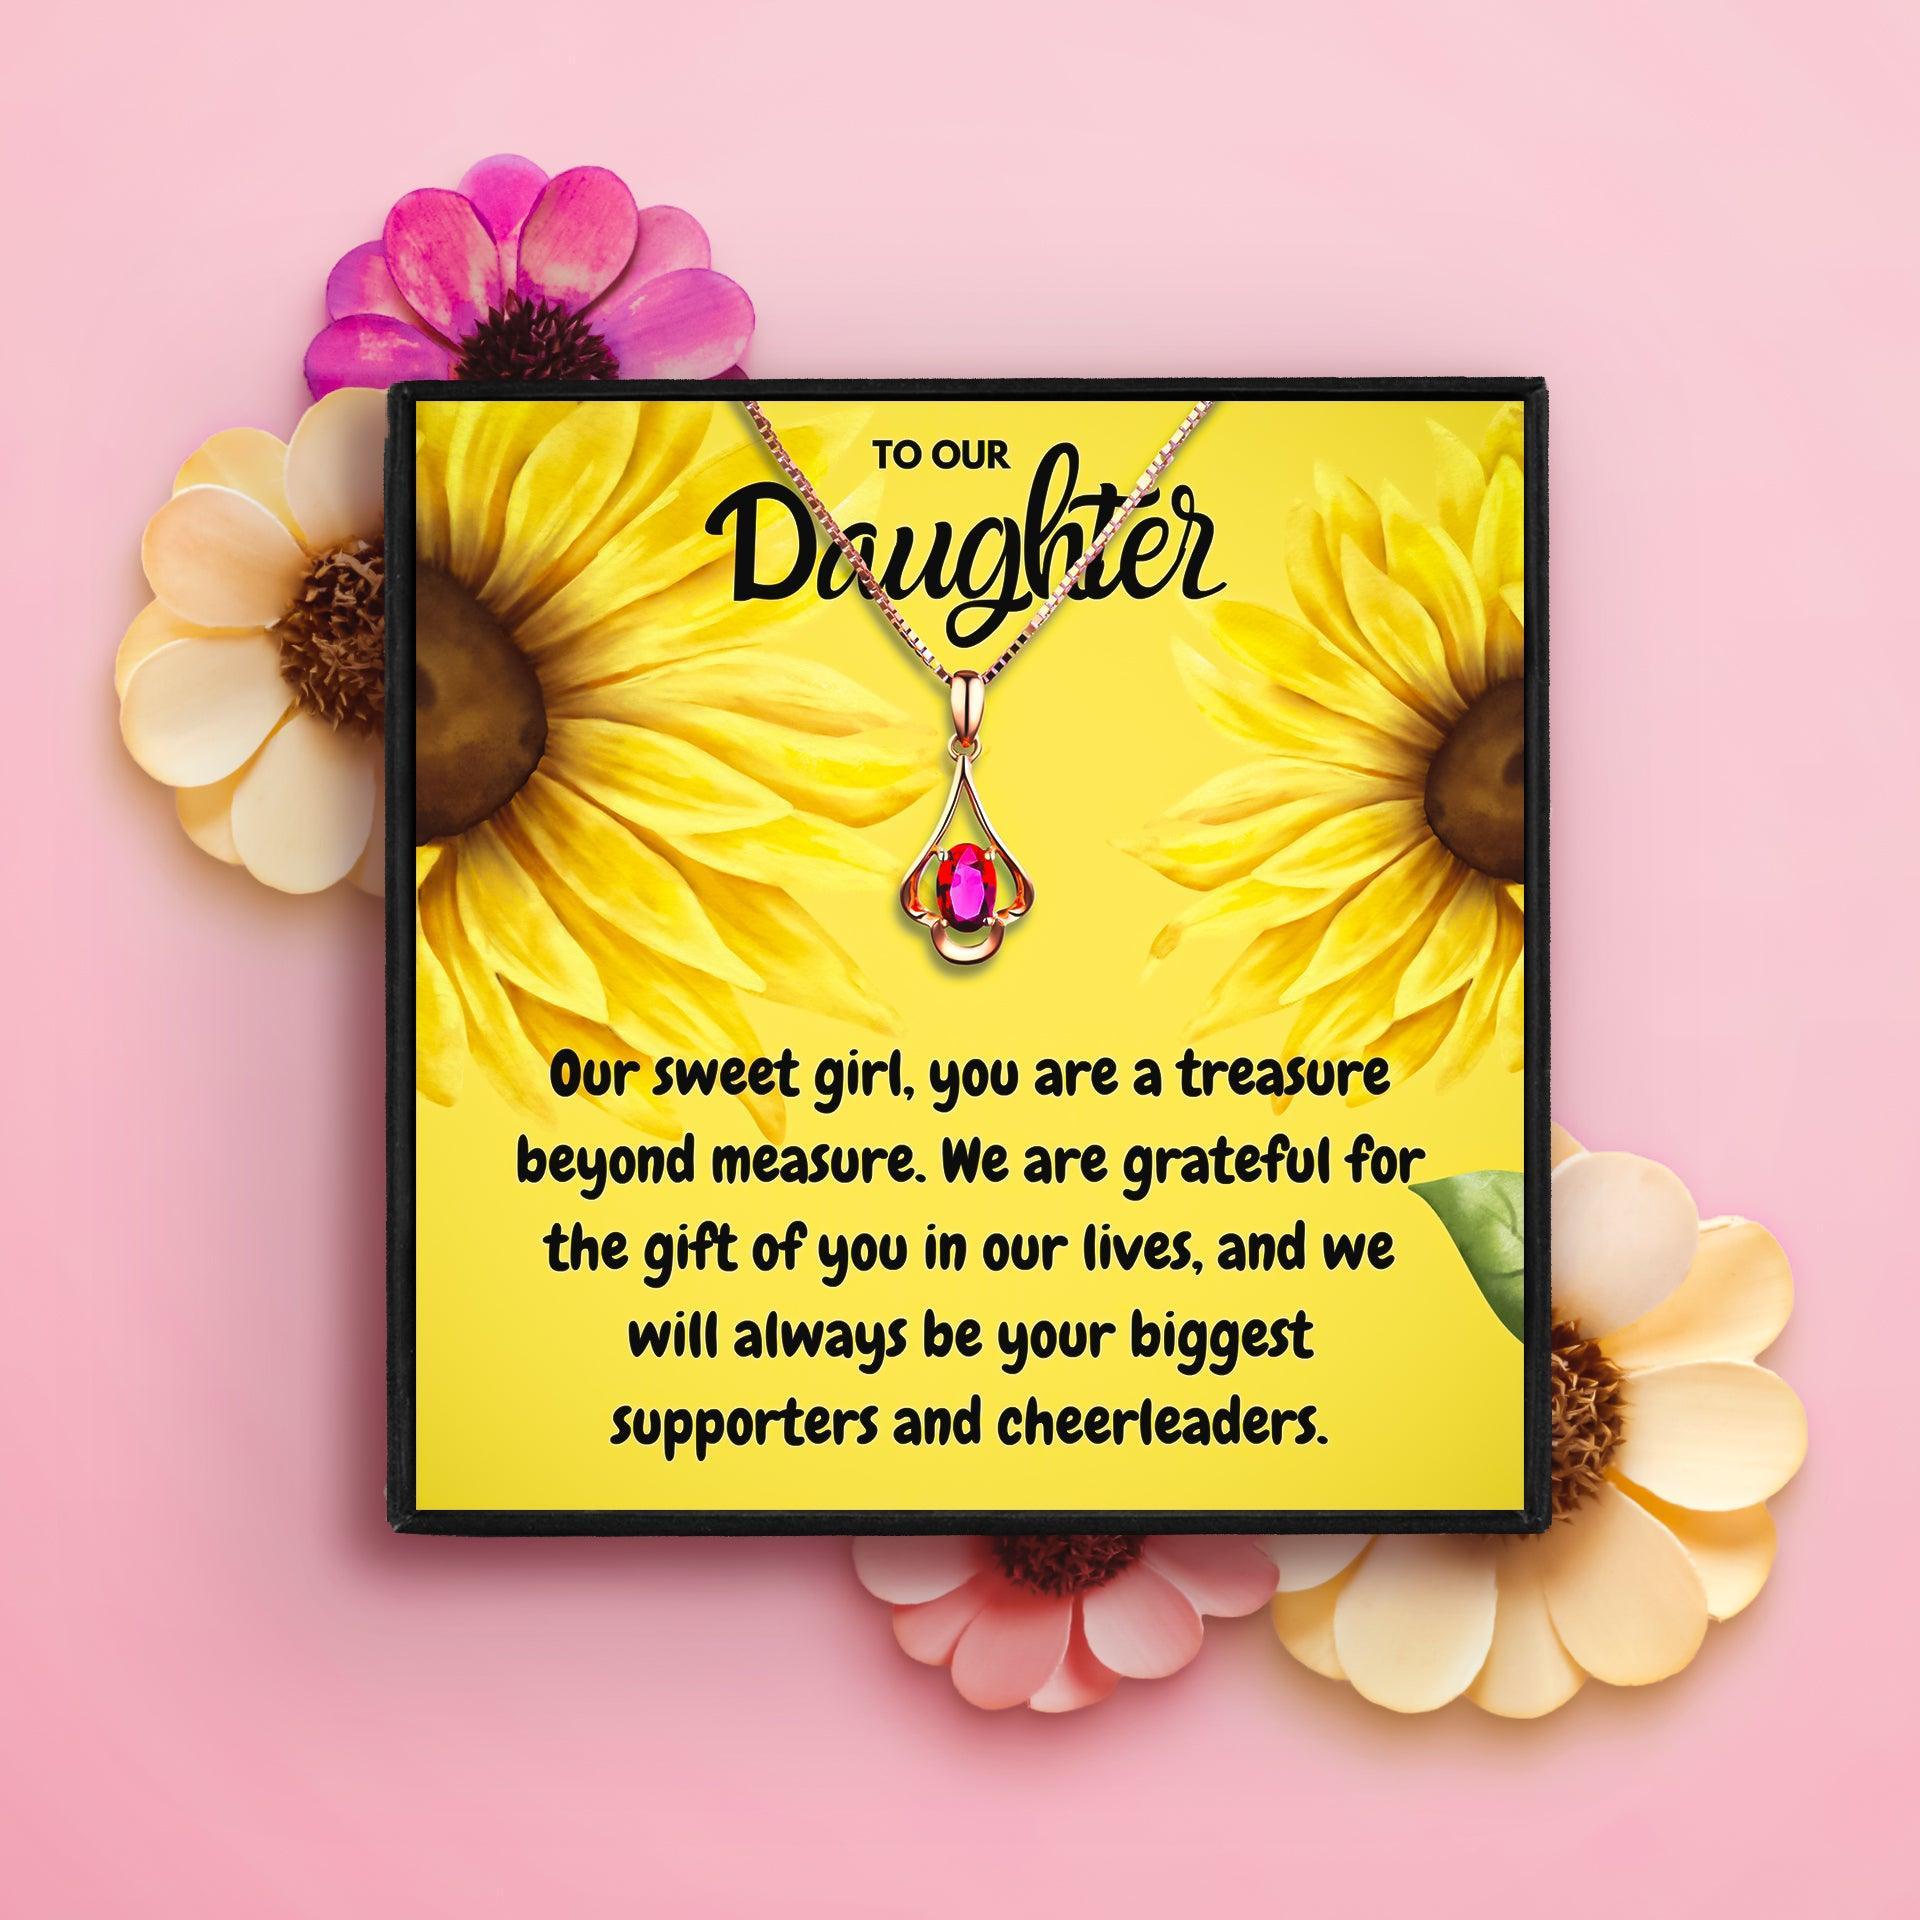 To Our Daughter Necklace with Message Card in 2023 | To Our Daughter Necklace with Message Card - undefined | For My Daughter necklace, Meaningful Daughter Necklaces, Mother Daughter Necklace, To my daughter necklace, To Our Daughter necklace | From Hunny Life | hunnylife.com